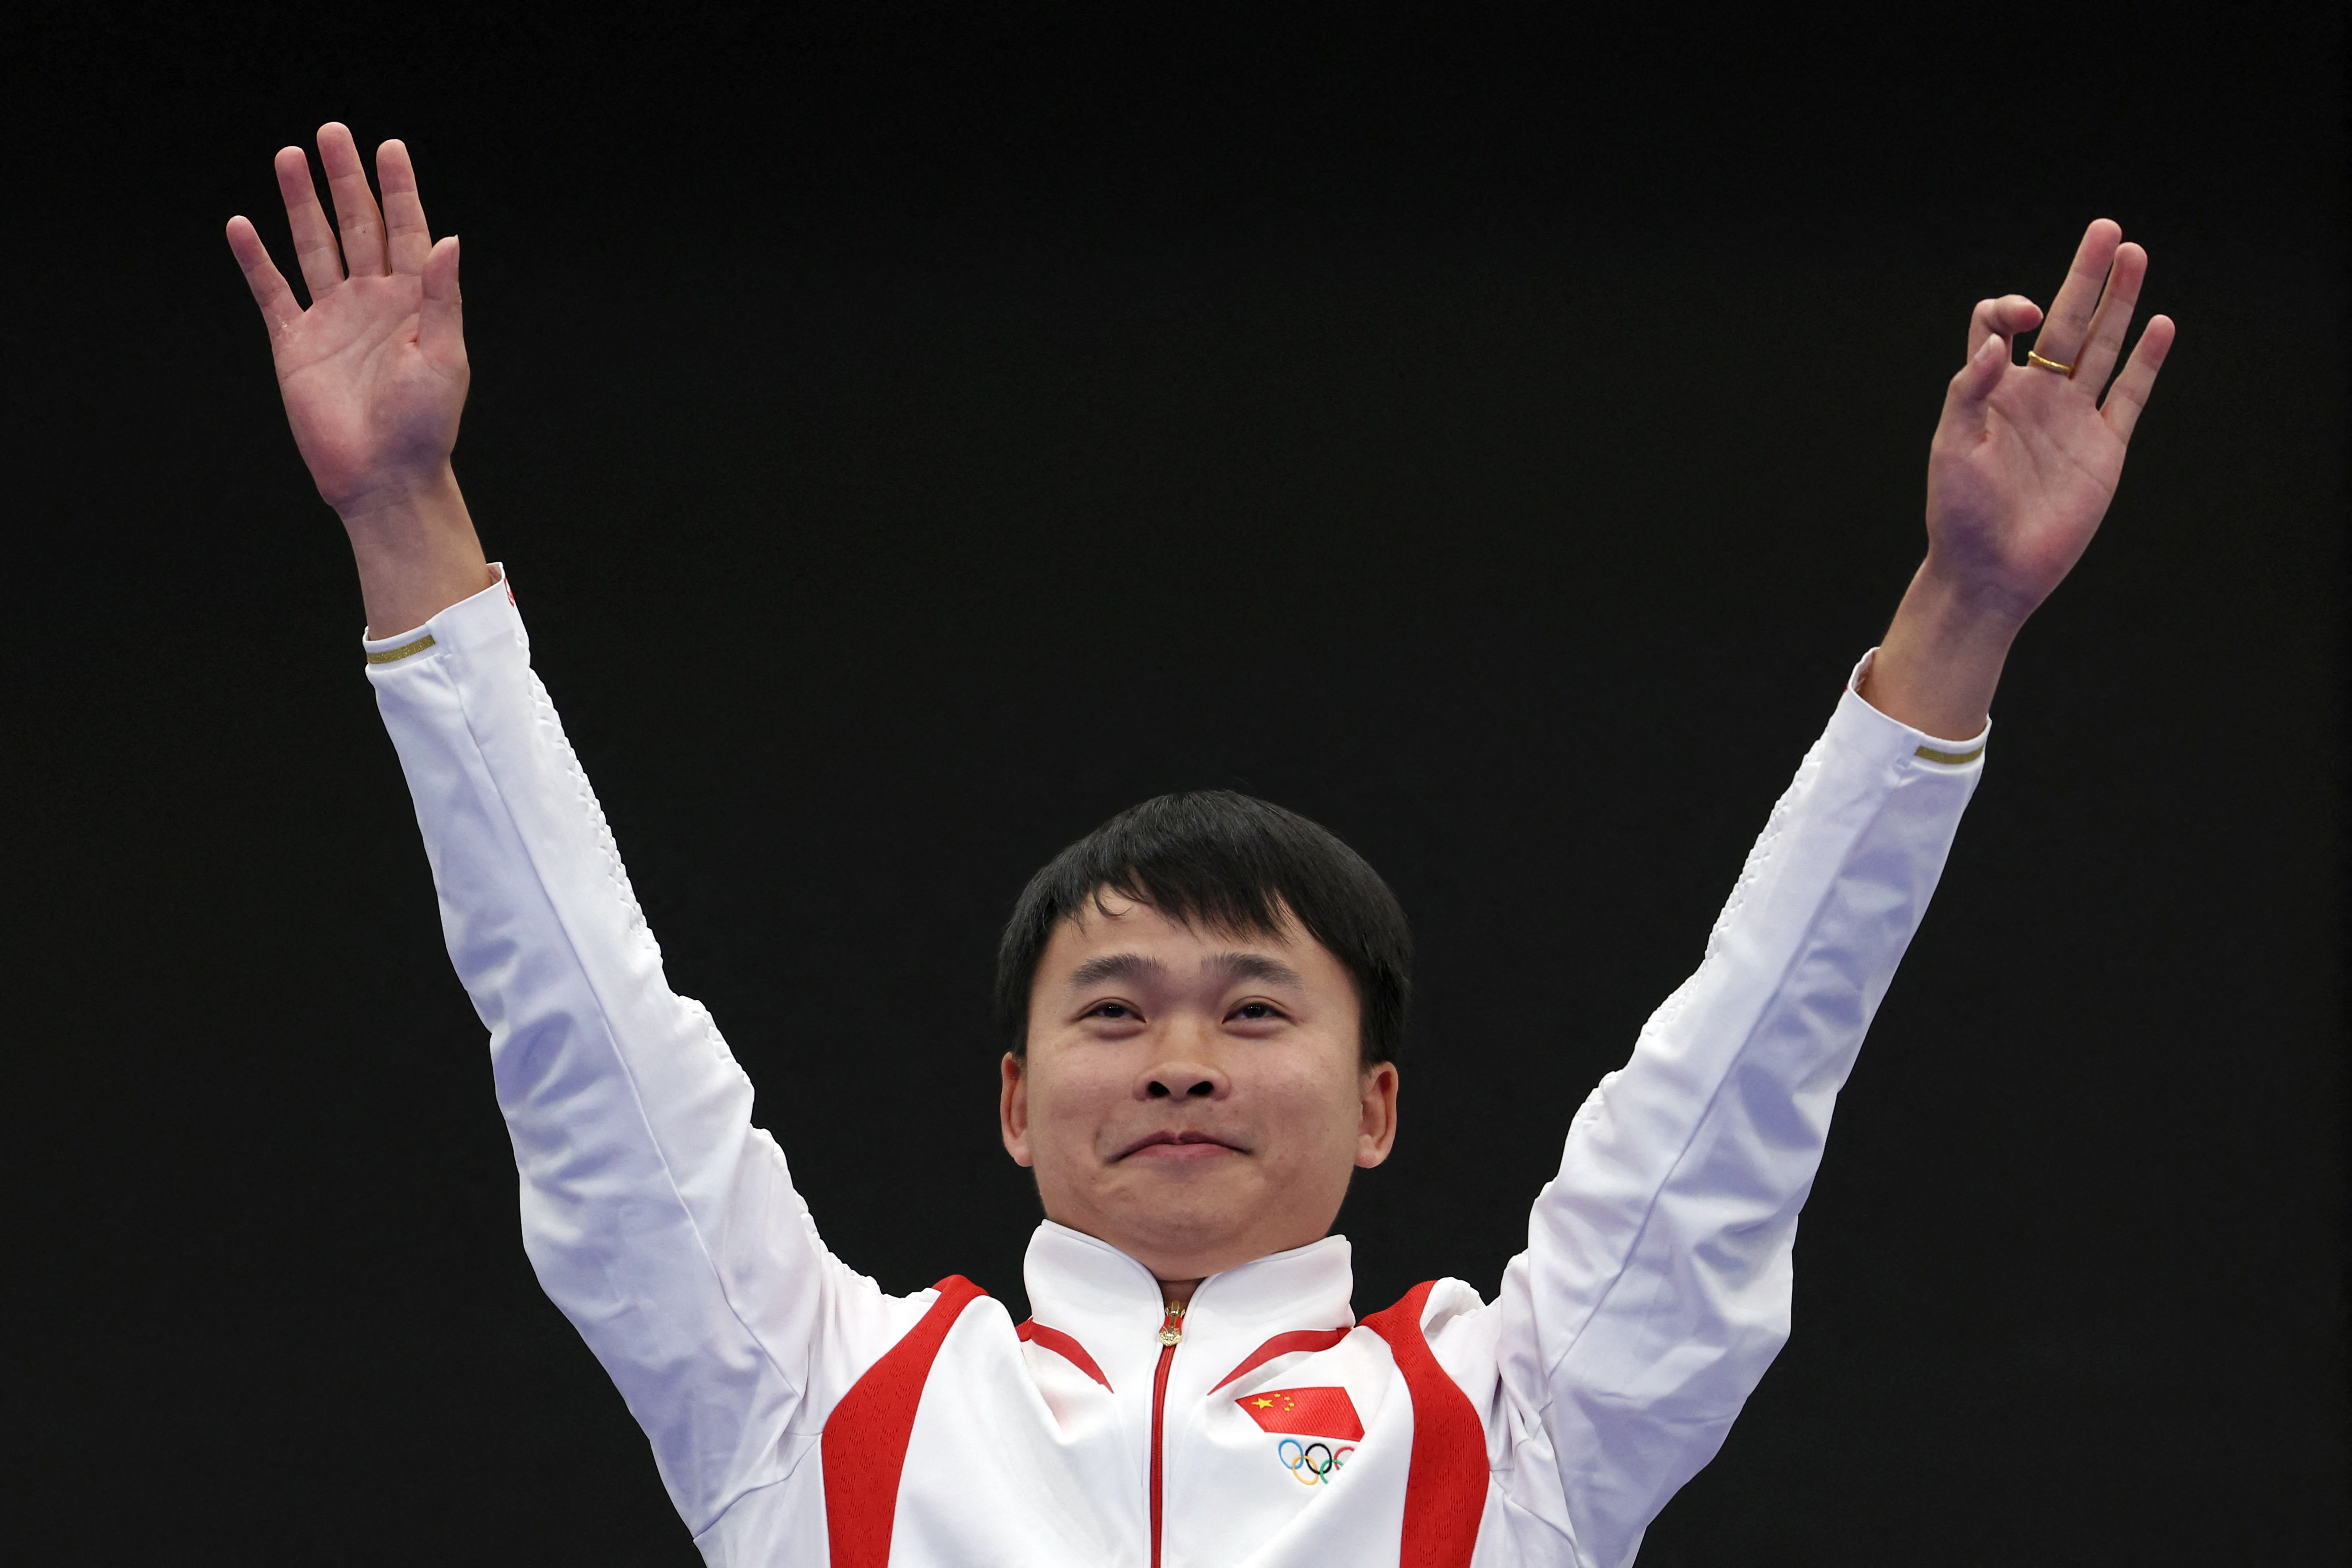 Gold medalist, China's Xie Yu poses on the podium at the end of the shooting 10m air aifle men's final during the Paris 2024 Olympic Games at Chateauroux Shooting Centre on July 28, 2024. (Photo by Alain JOCARD / AFP)